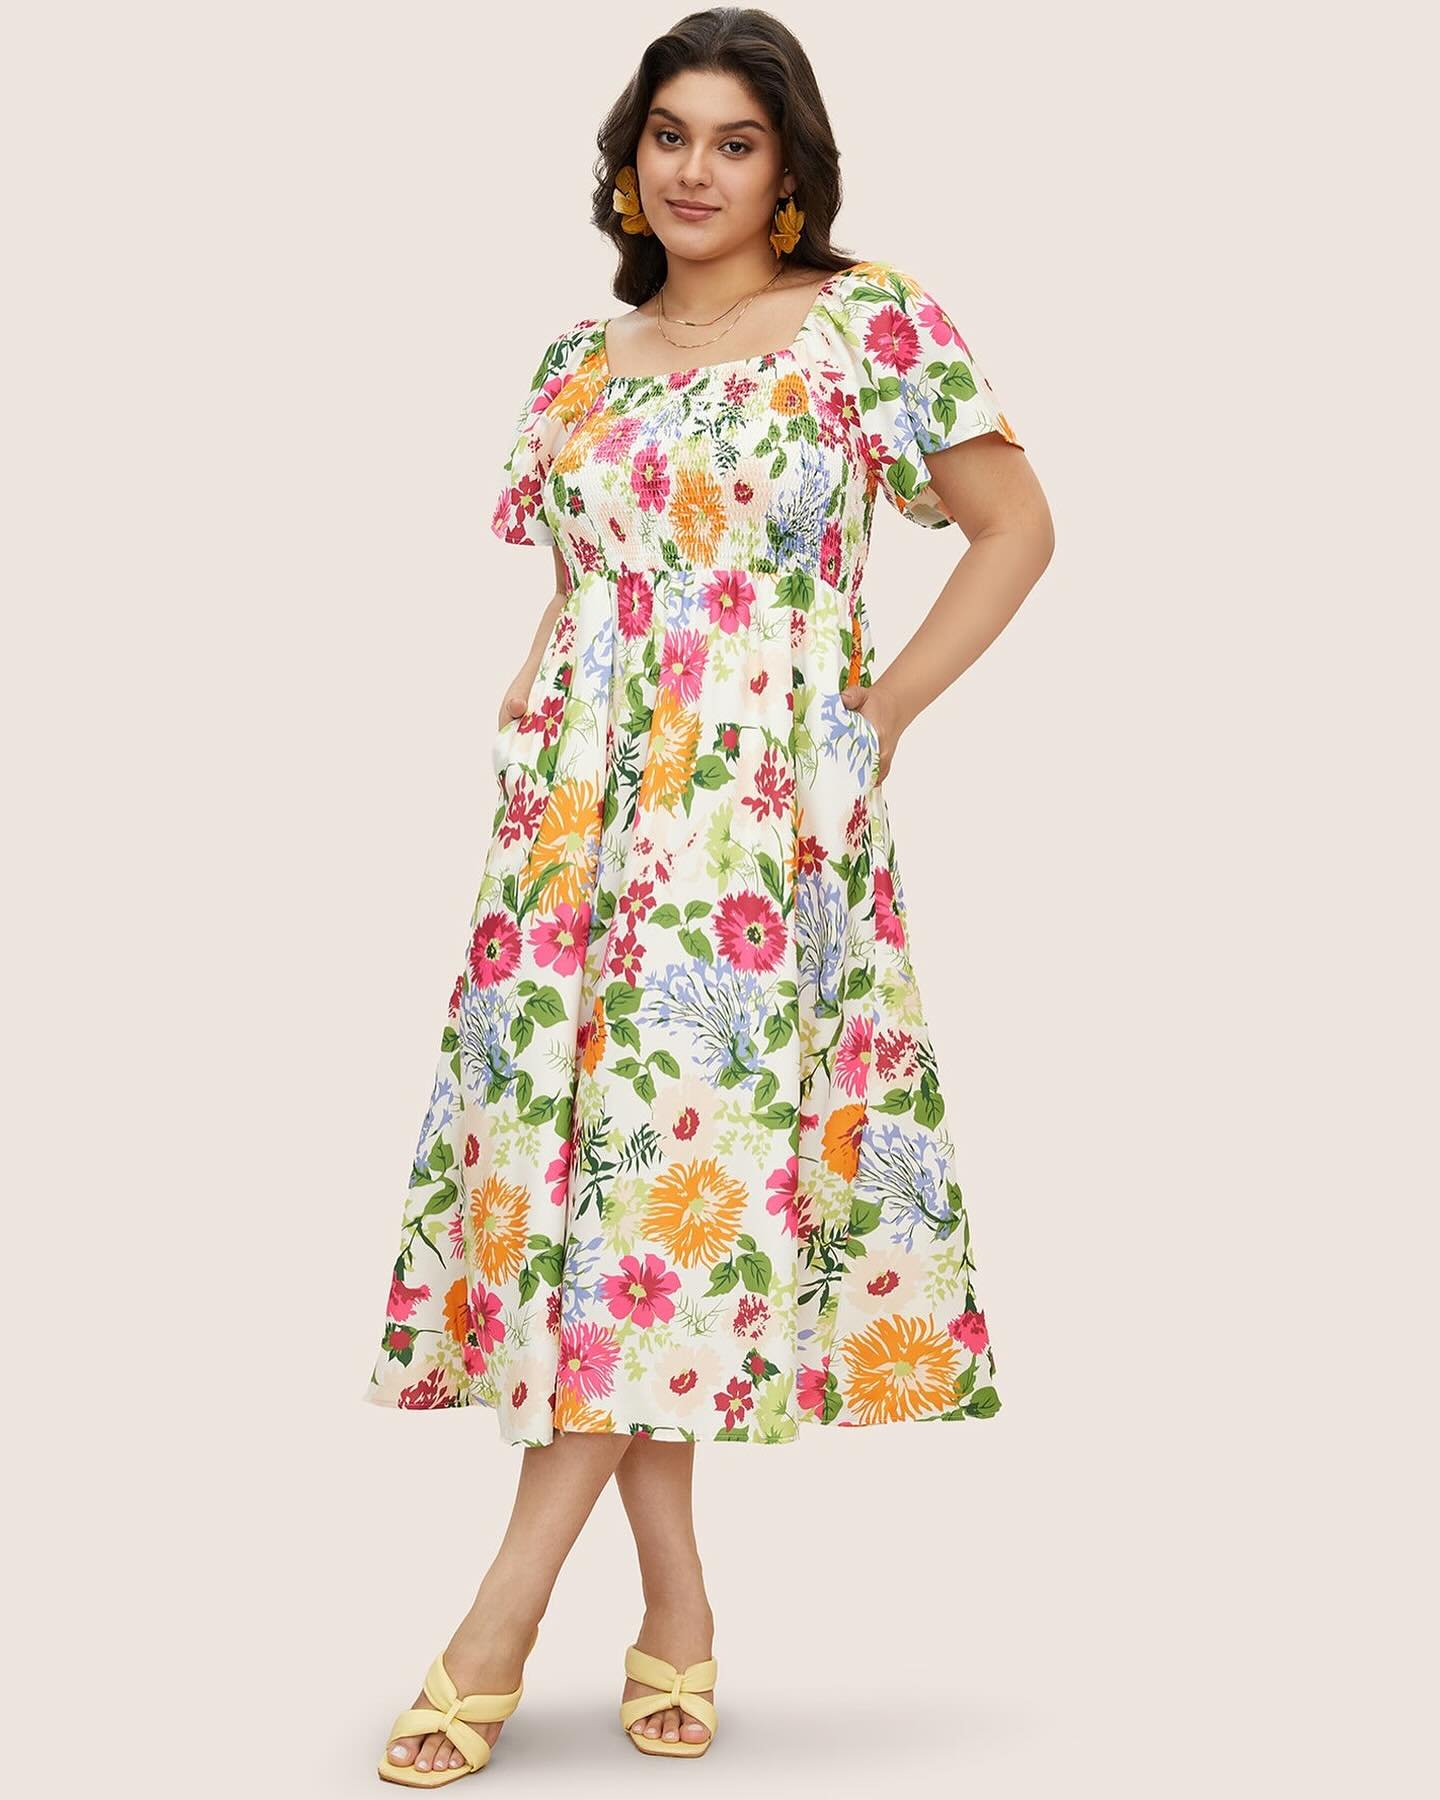 You are event ready in this gorgeous BNWT Bloomchic Floral Dress. 💐✨

Available in store or online at consignyourcurves.com 🛍️

BLOOMCHIC - square neck, floral ruffle hem dress Size 26 $30

📸 - Bloomchic

#plus #plussize #plussizedresses #plussize